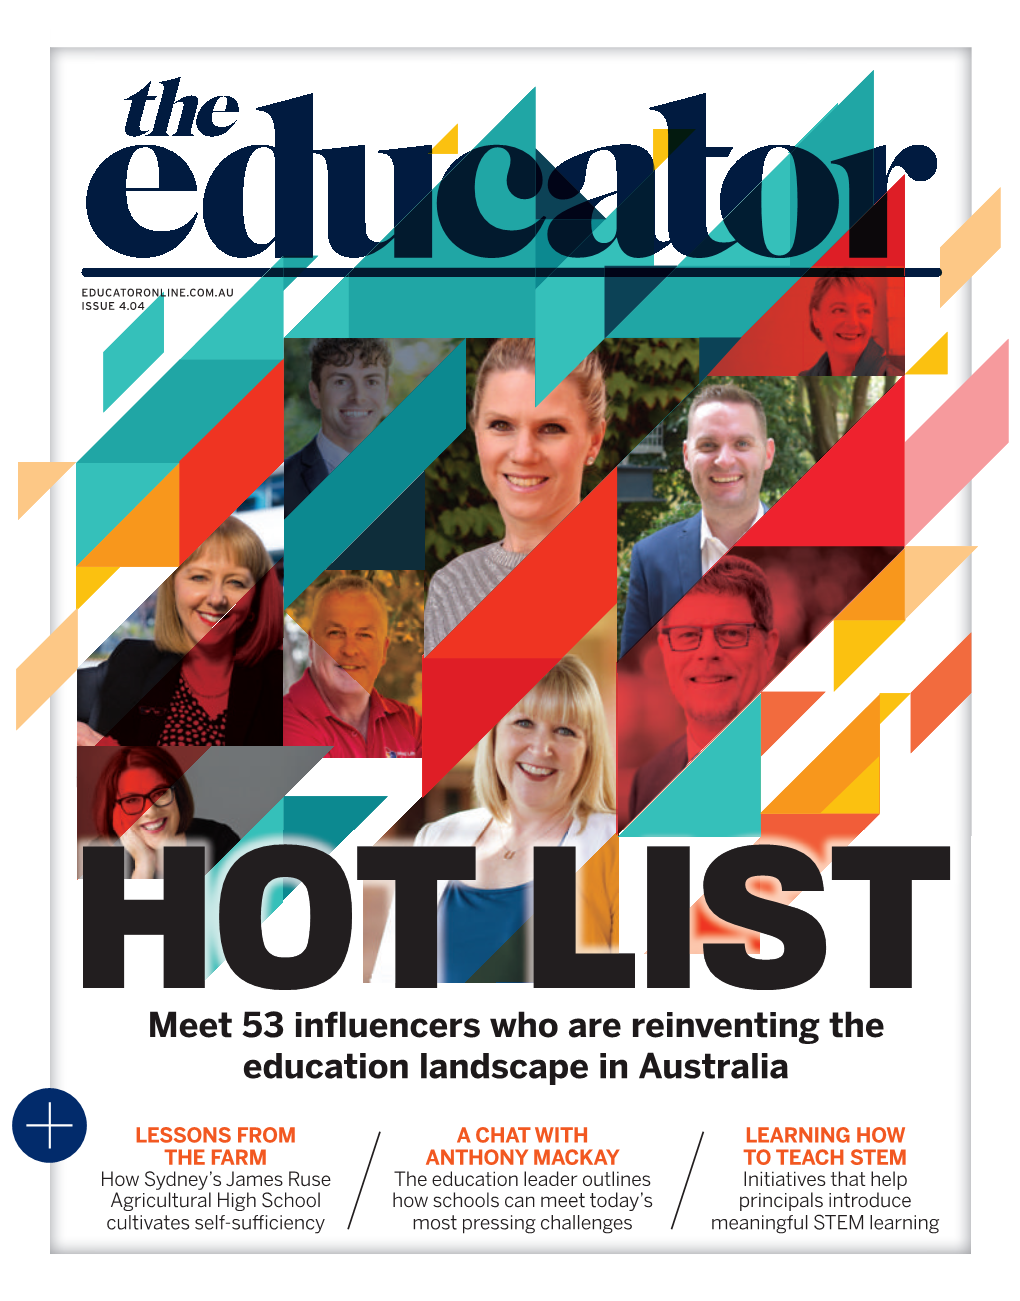 HOT LIST Meet 53 Influencers Who Are Reinventing the Education Landscape in Australia